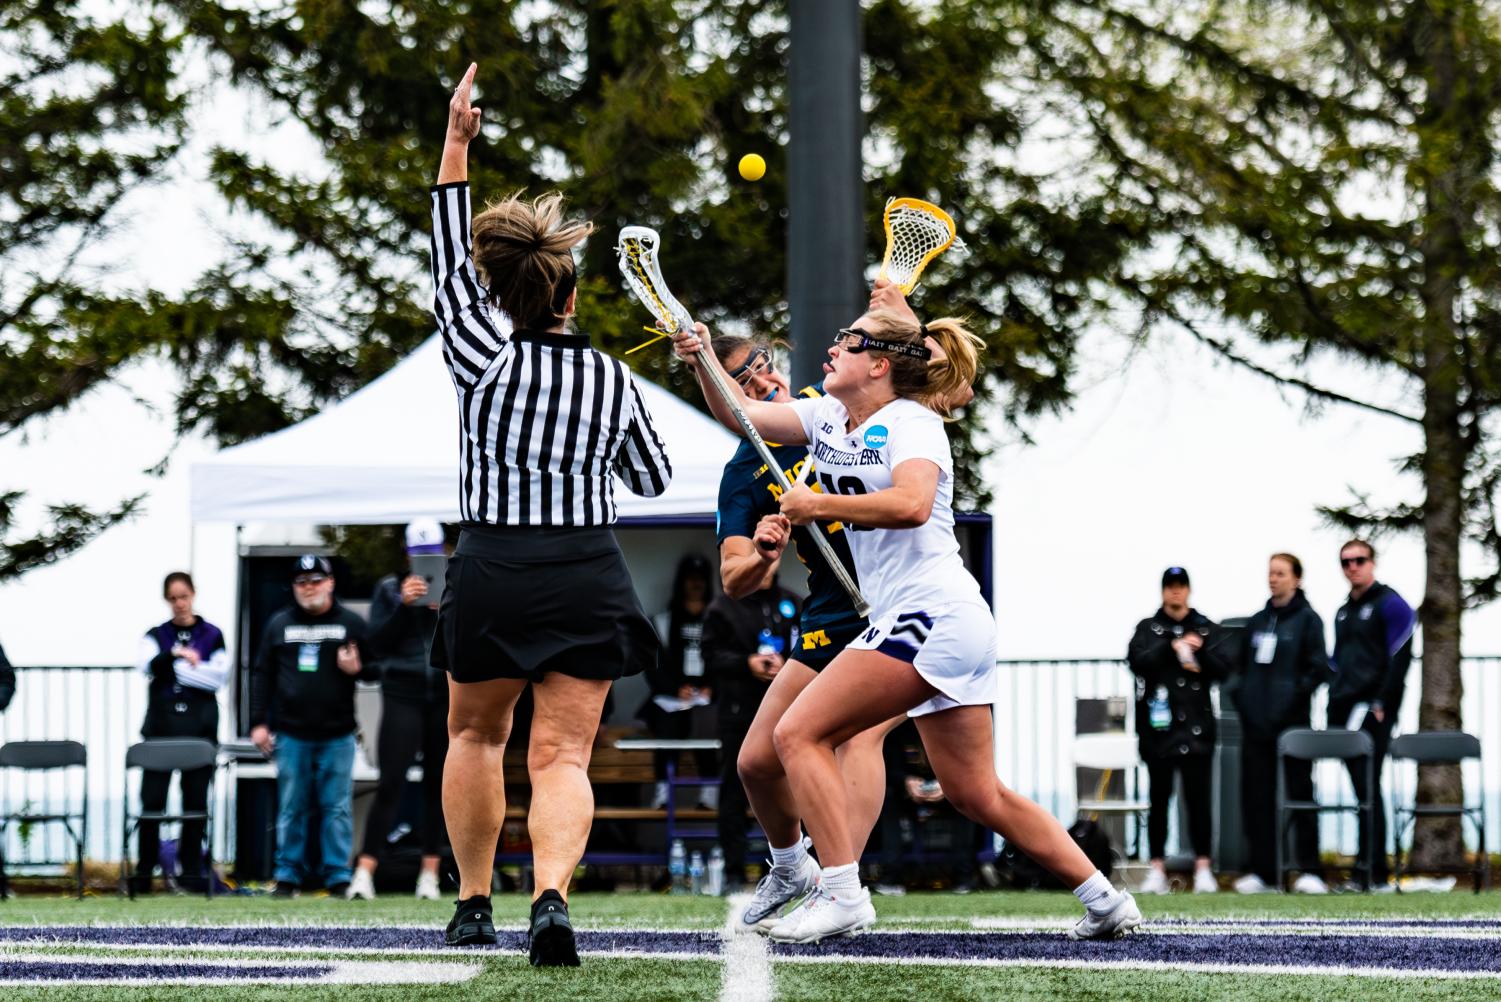 Two lacrosse players raise their sticks toward a ball as a referee points in the air.